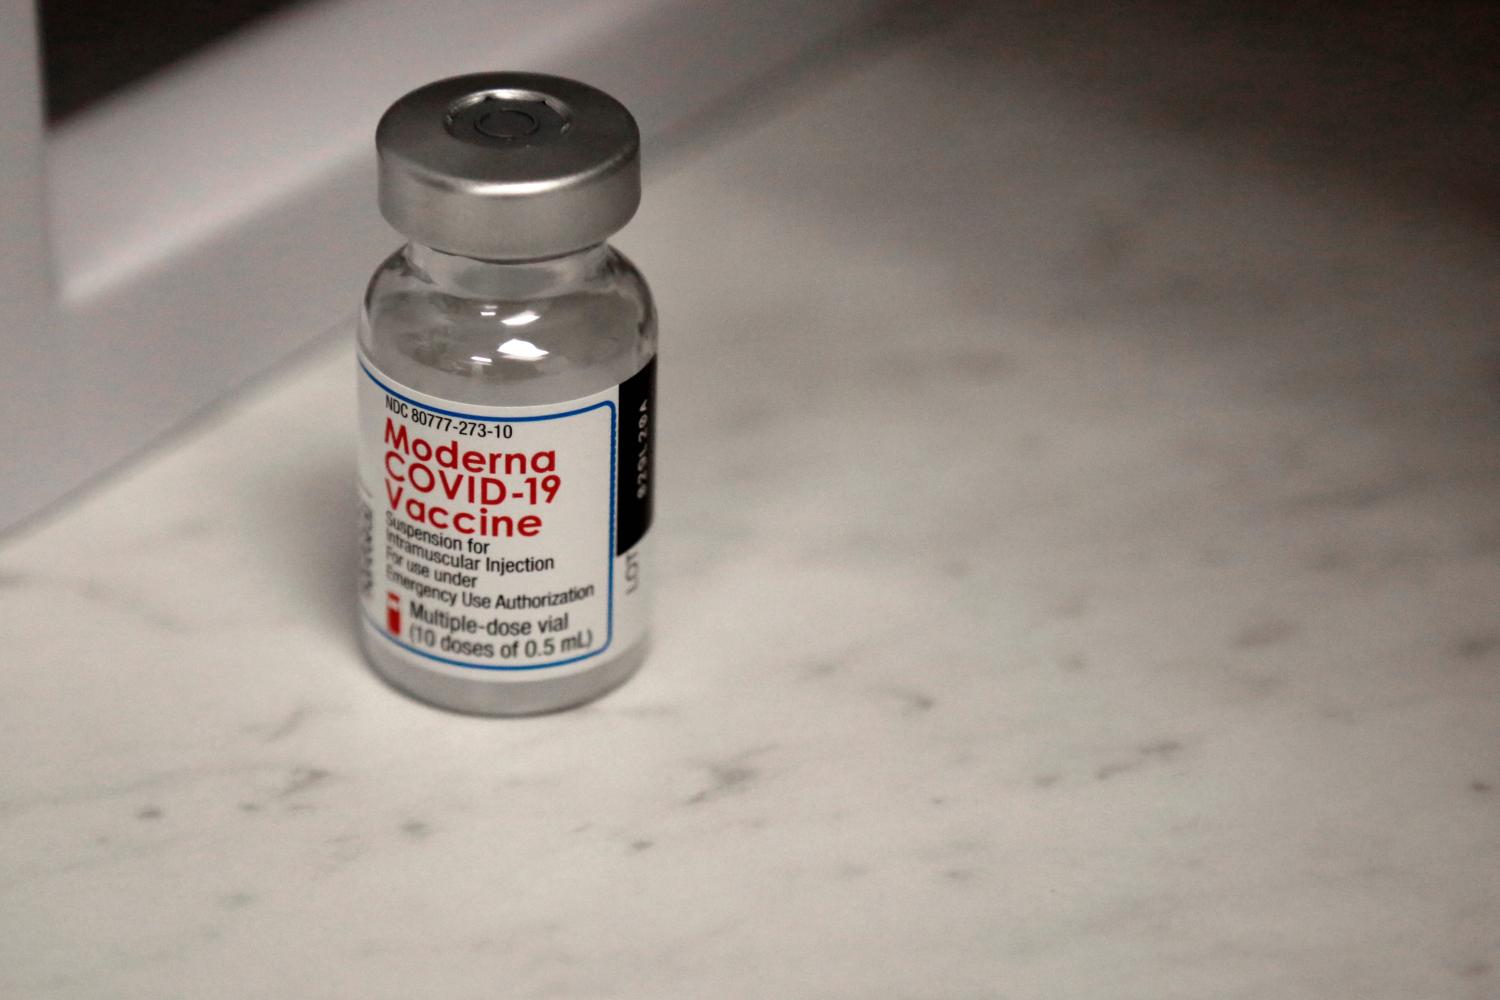 A vial of the Modern COVID-19 vaccine.Kroger Vaccine